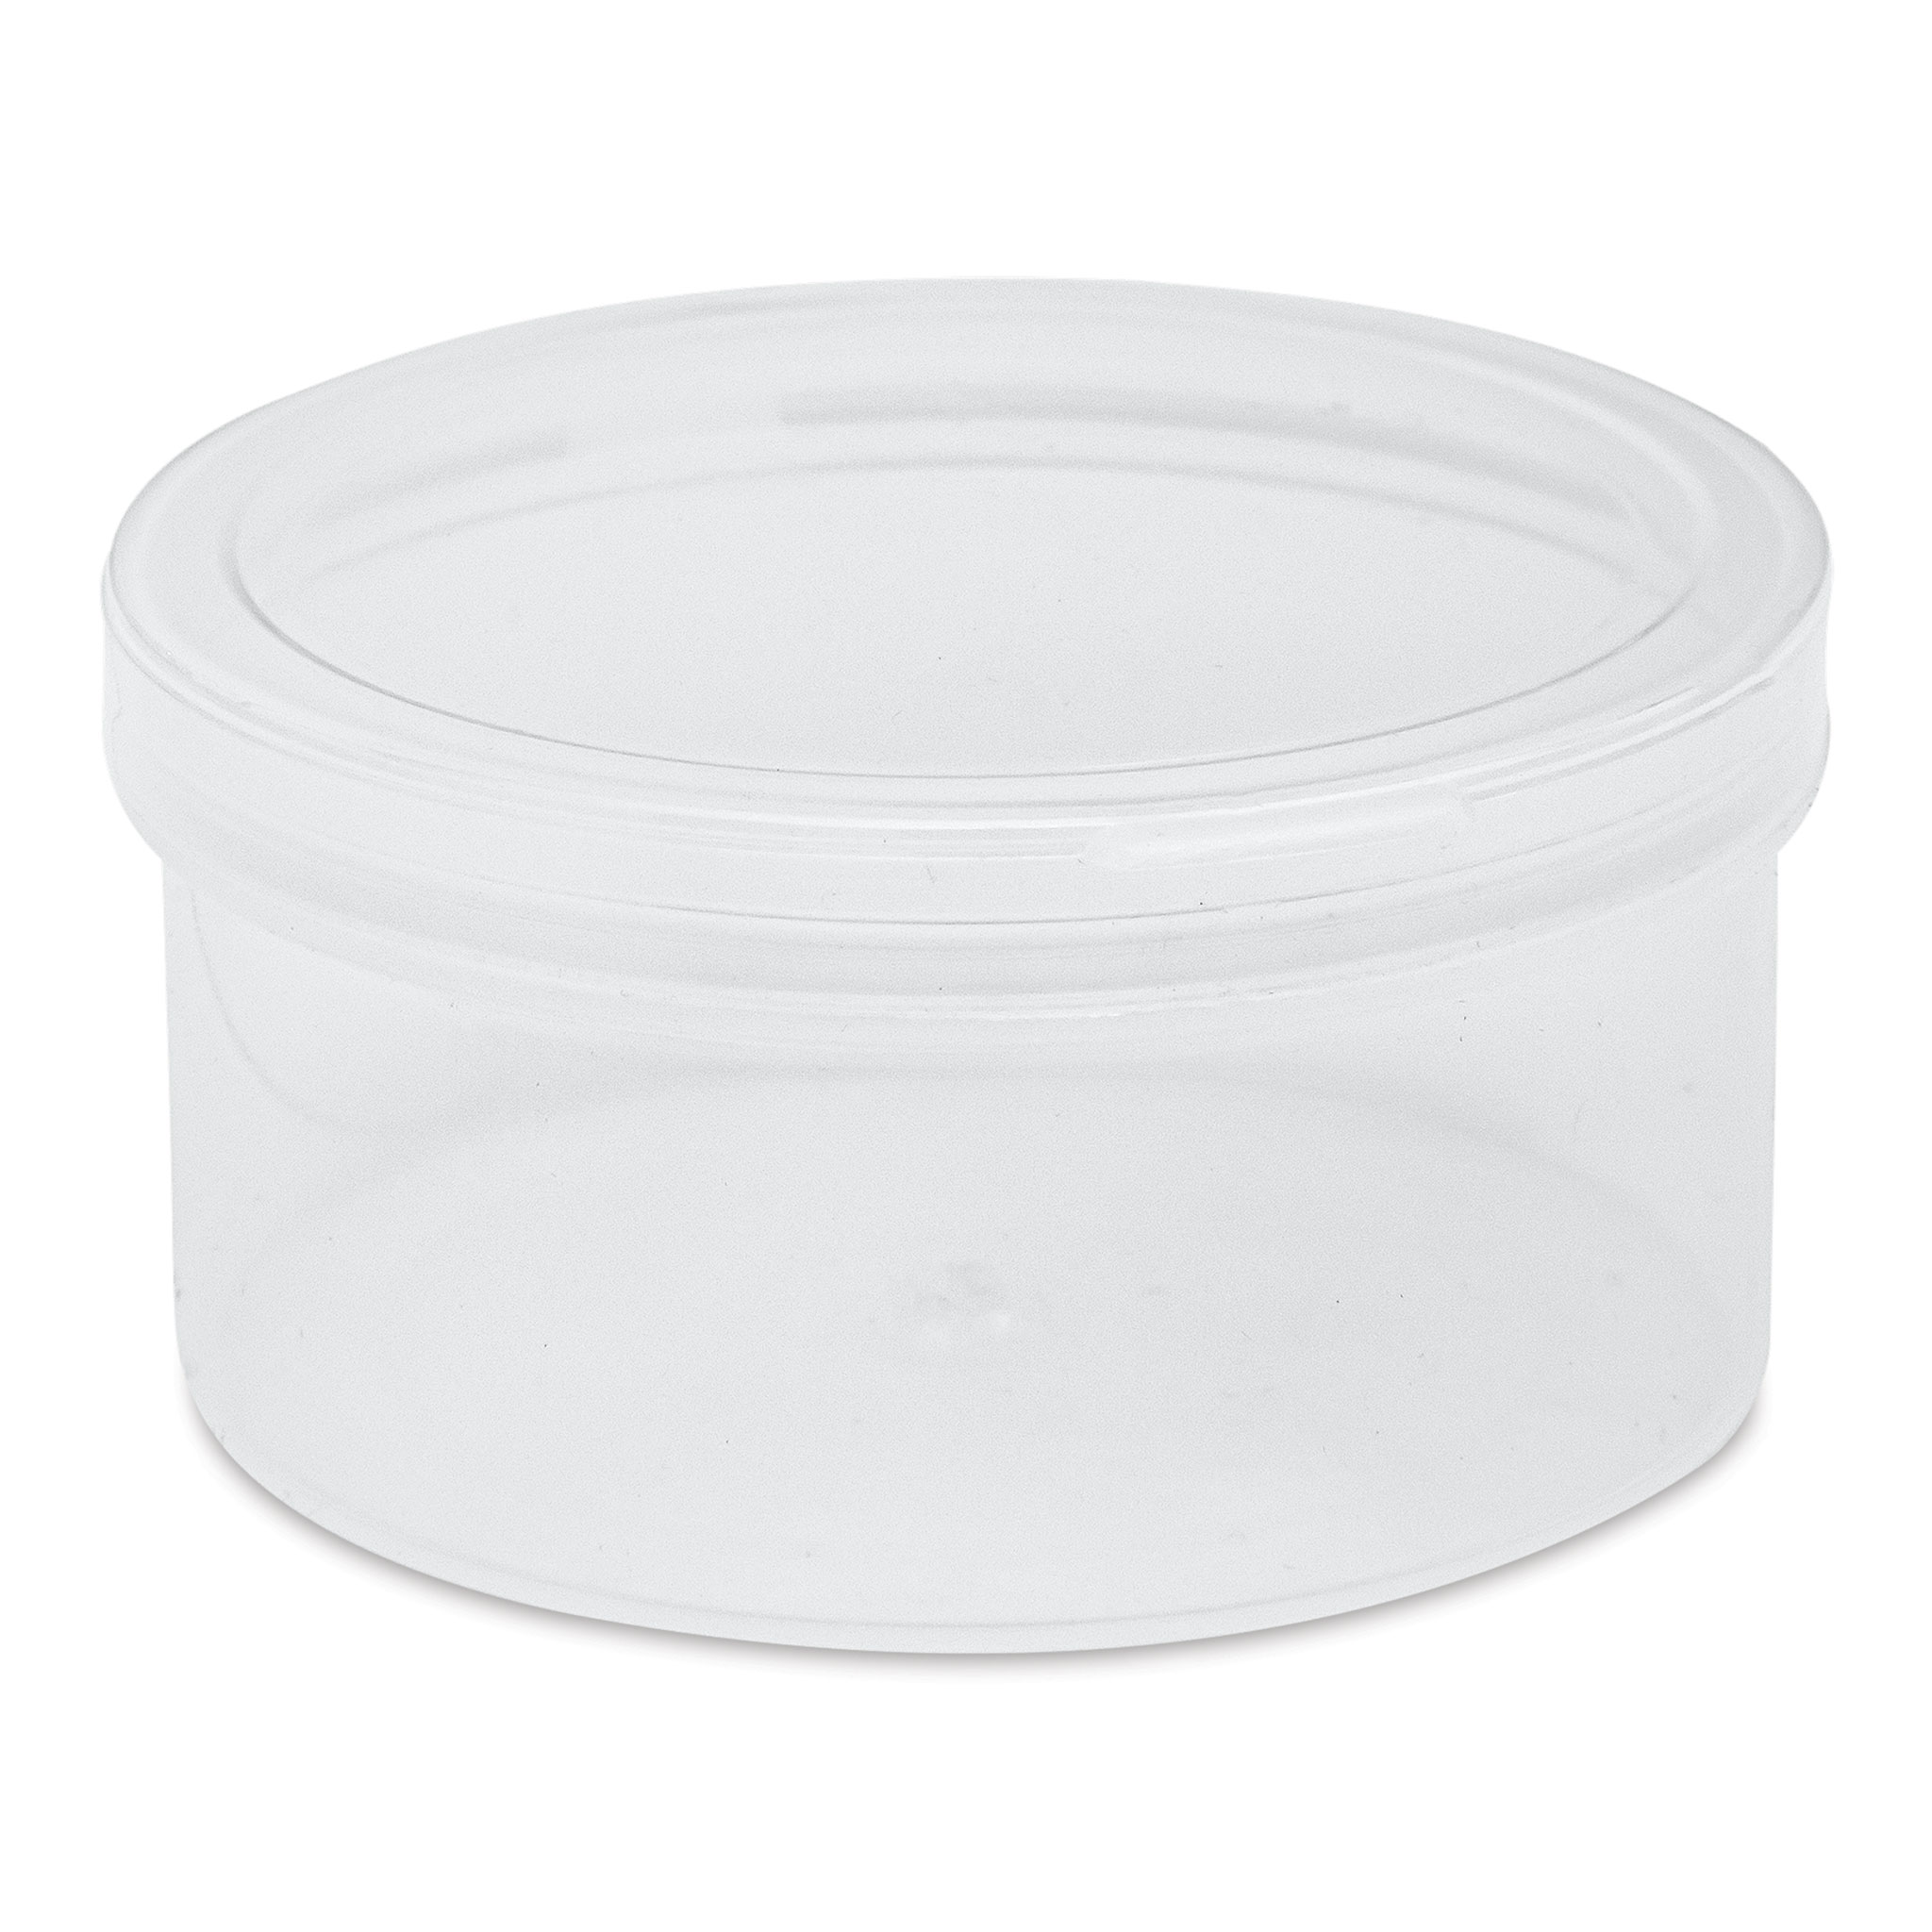 LaCons Flip Top Container - Hinged Lid, 3 oz